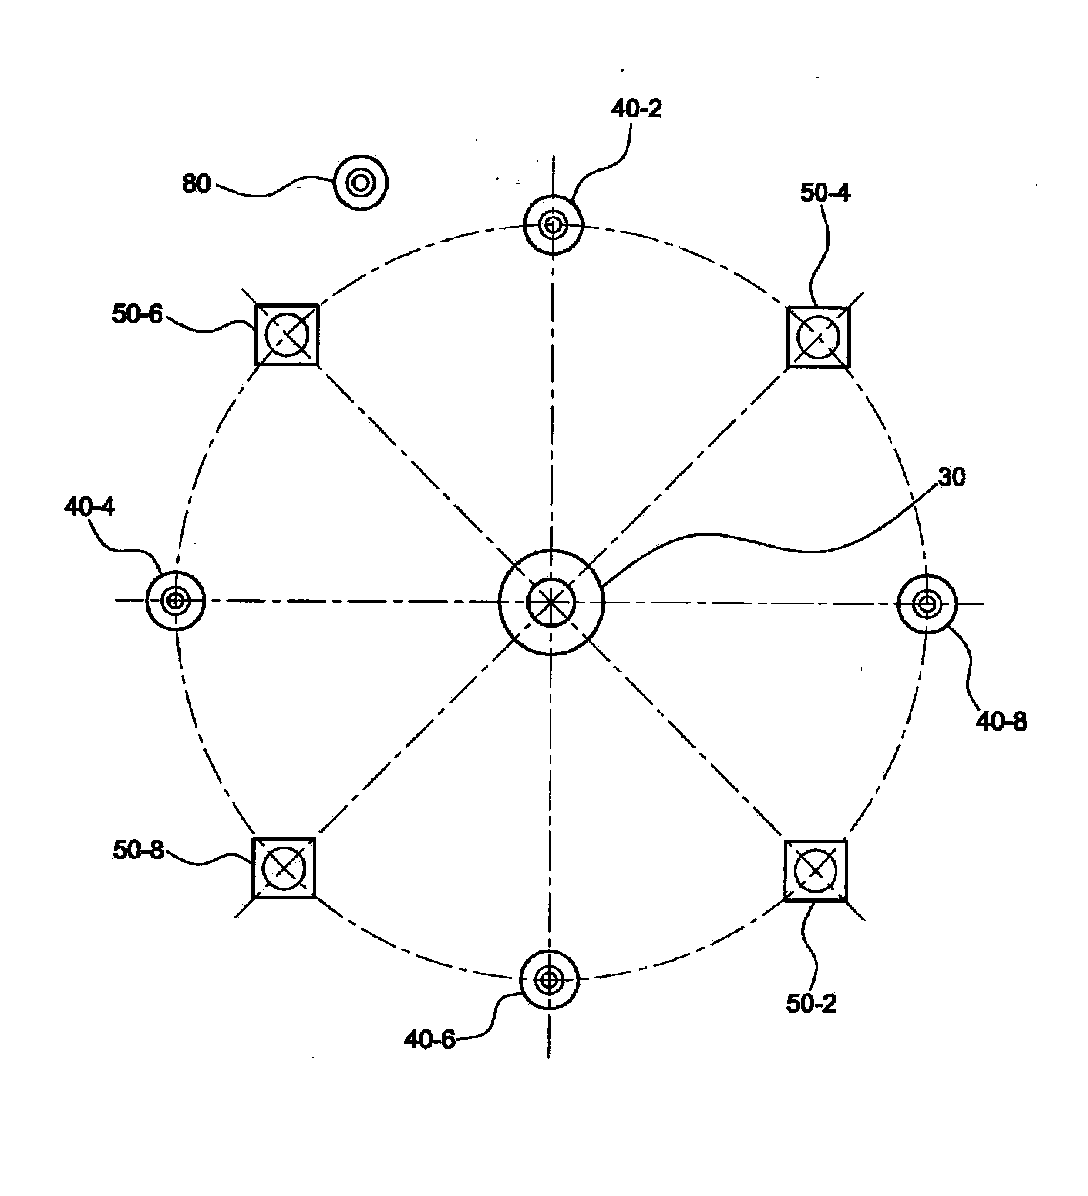 Vision testing device with enhanced image clarity